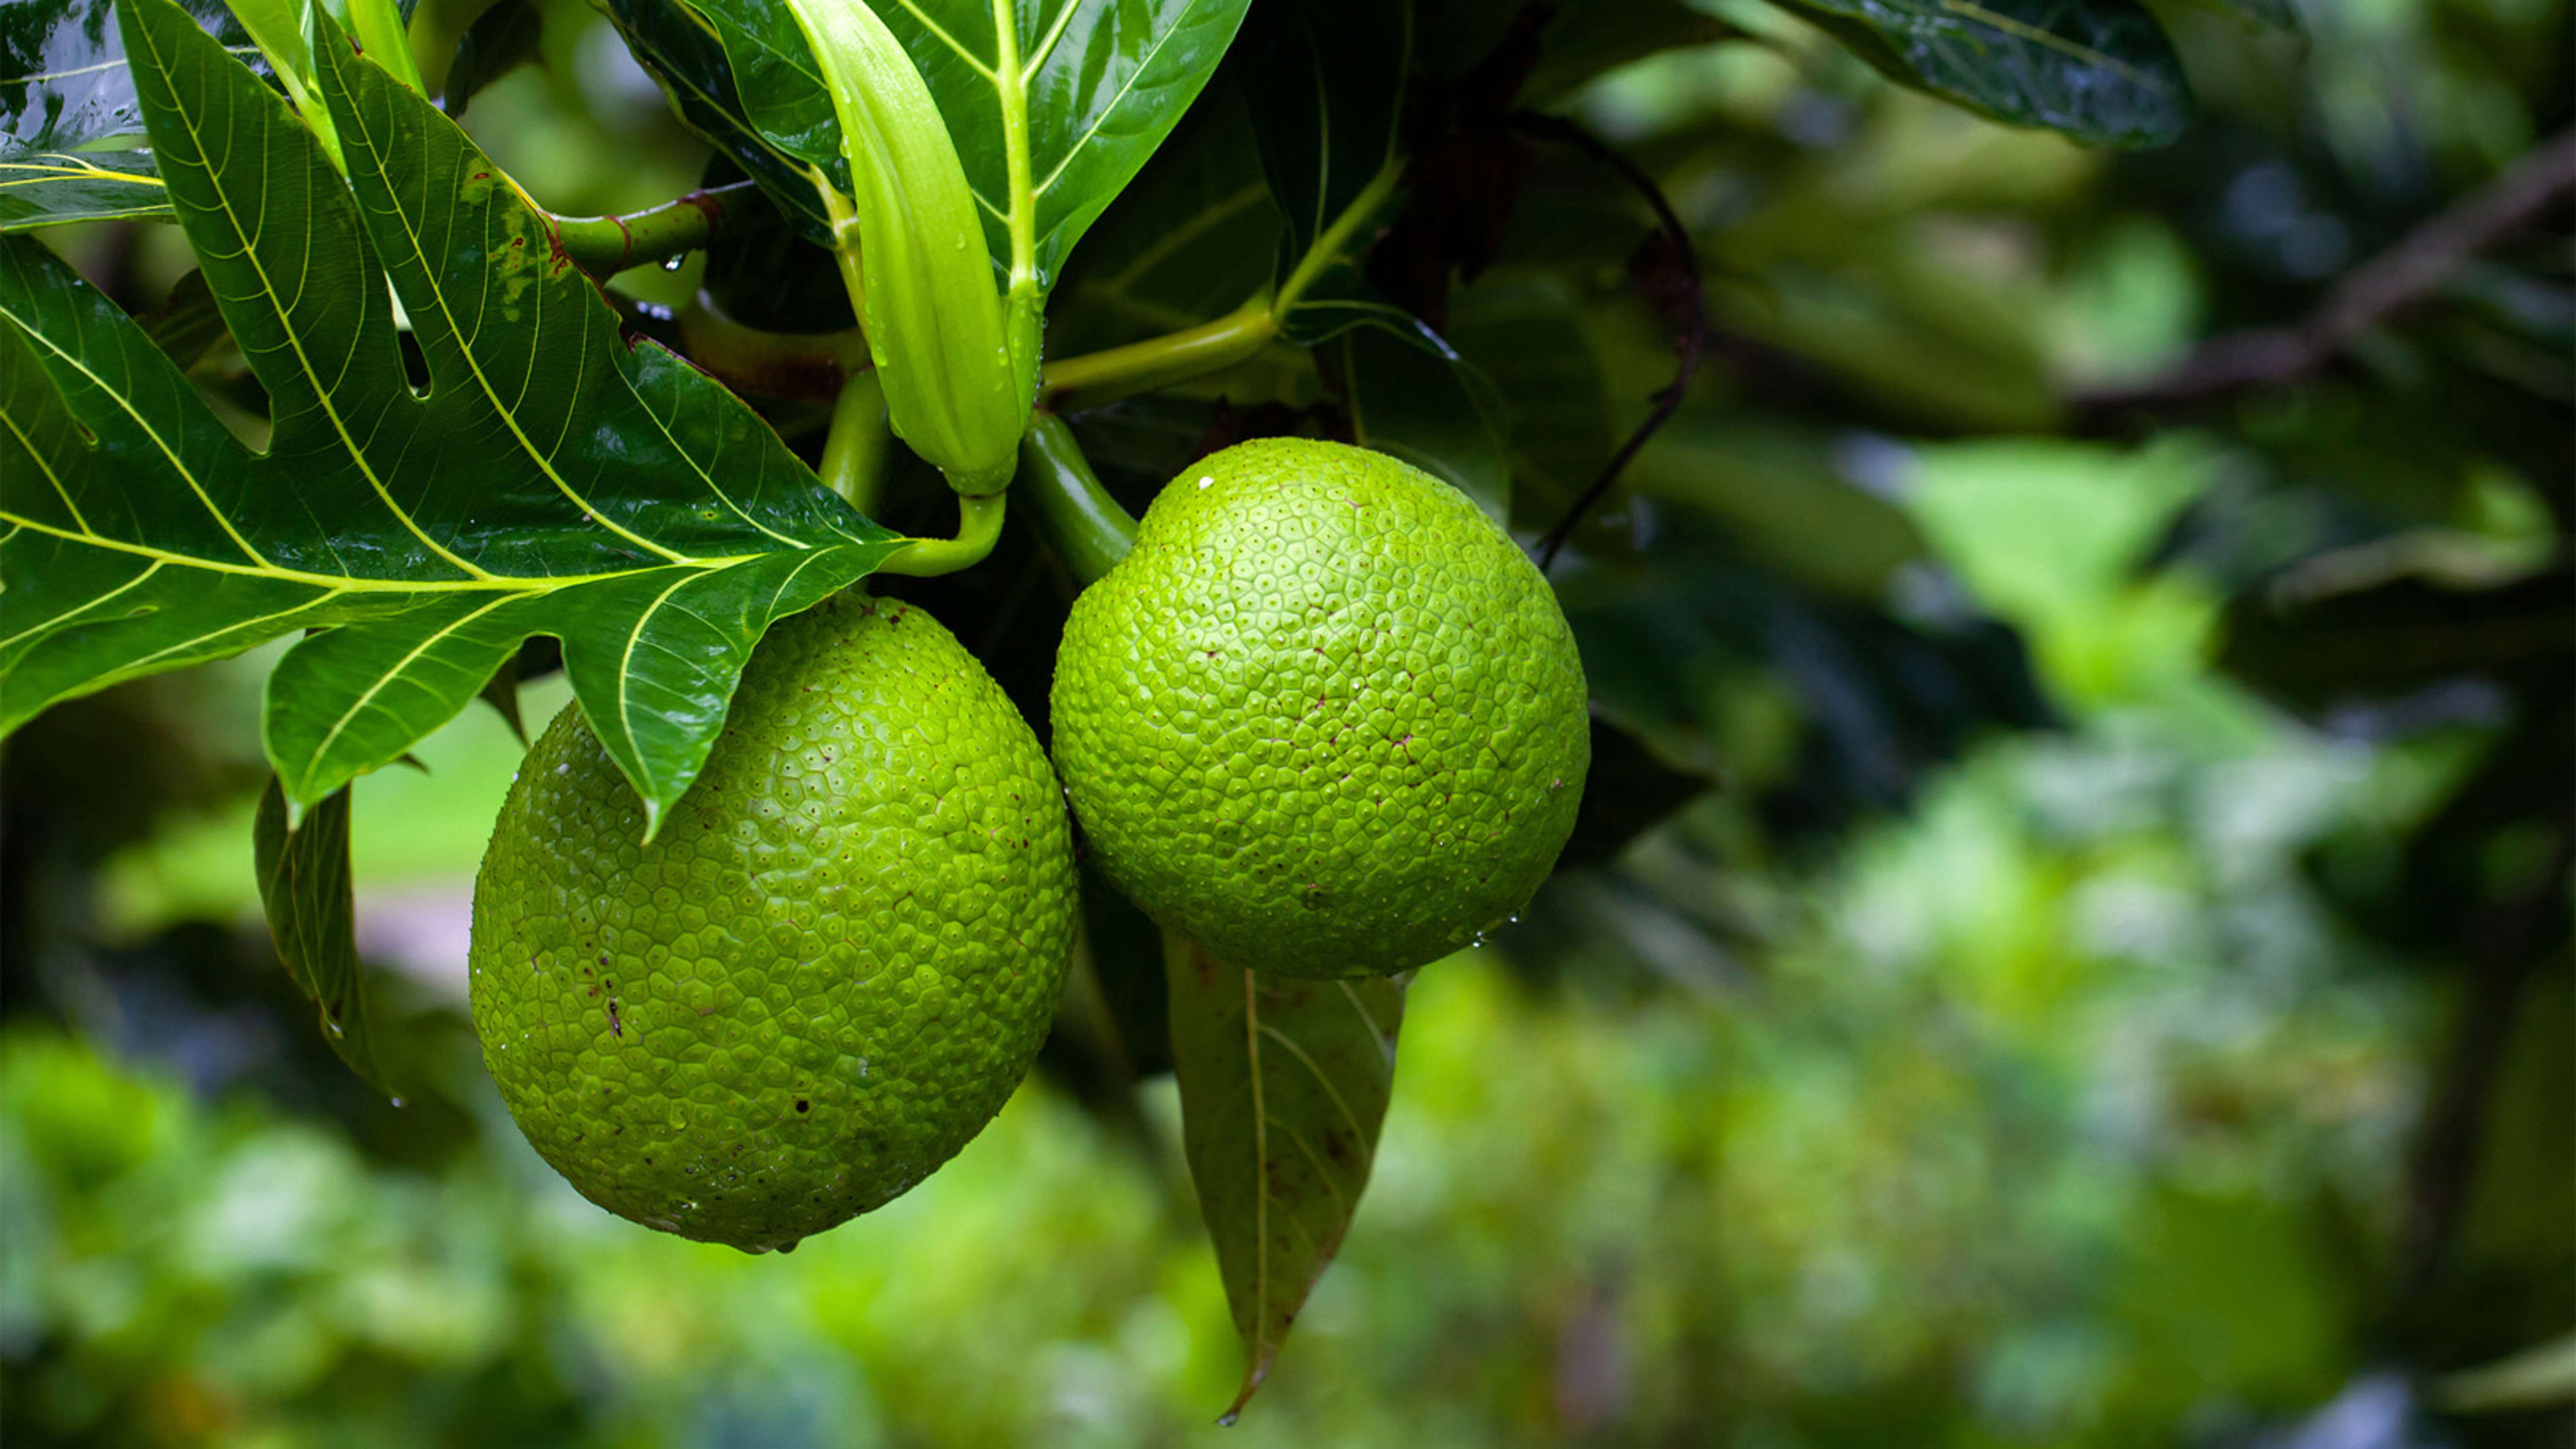 Many Americans probably haven’t eaten breadfruit. Patagonia wants to change that